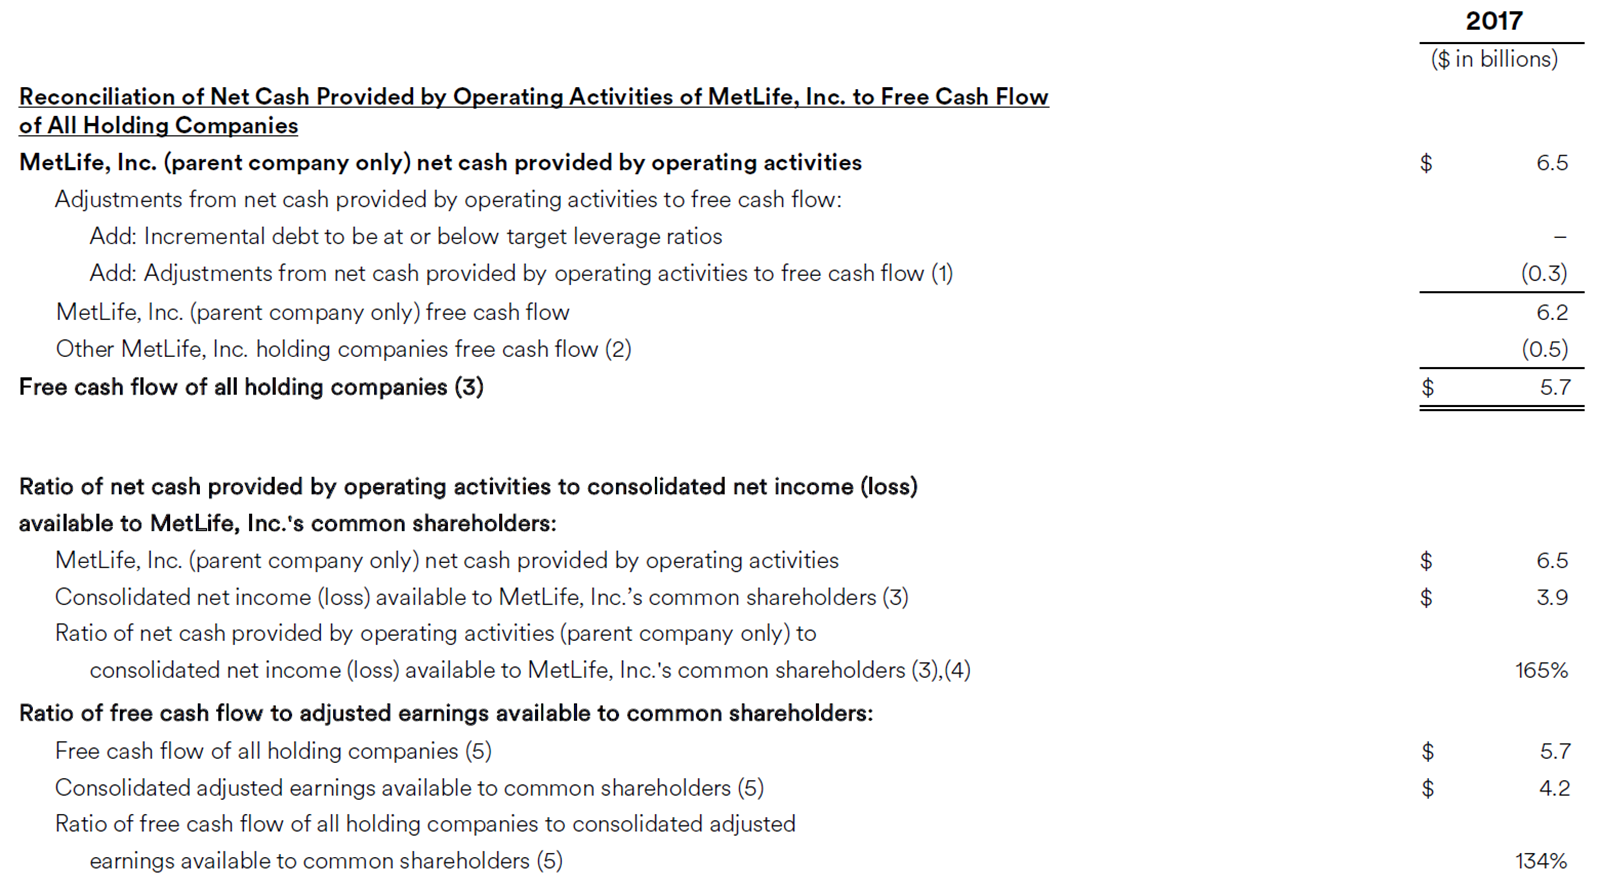 Reconciliation of Net Cash Provided by Operating Activities of MetLife, Inc. to Free Cash Flow
of All Holding Companies